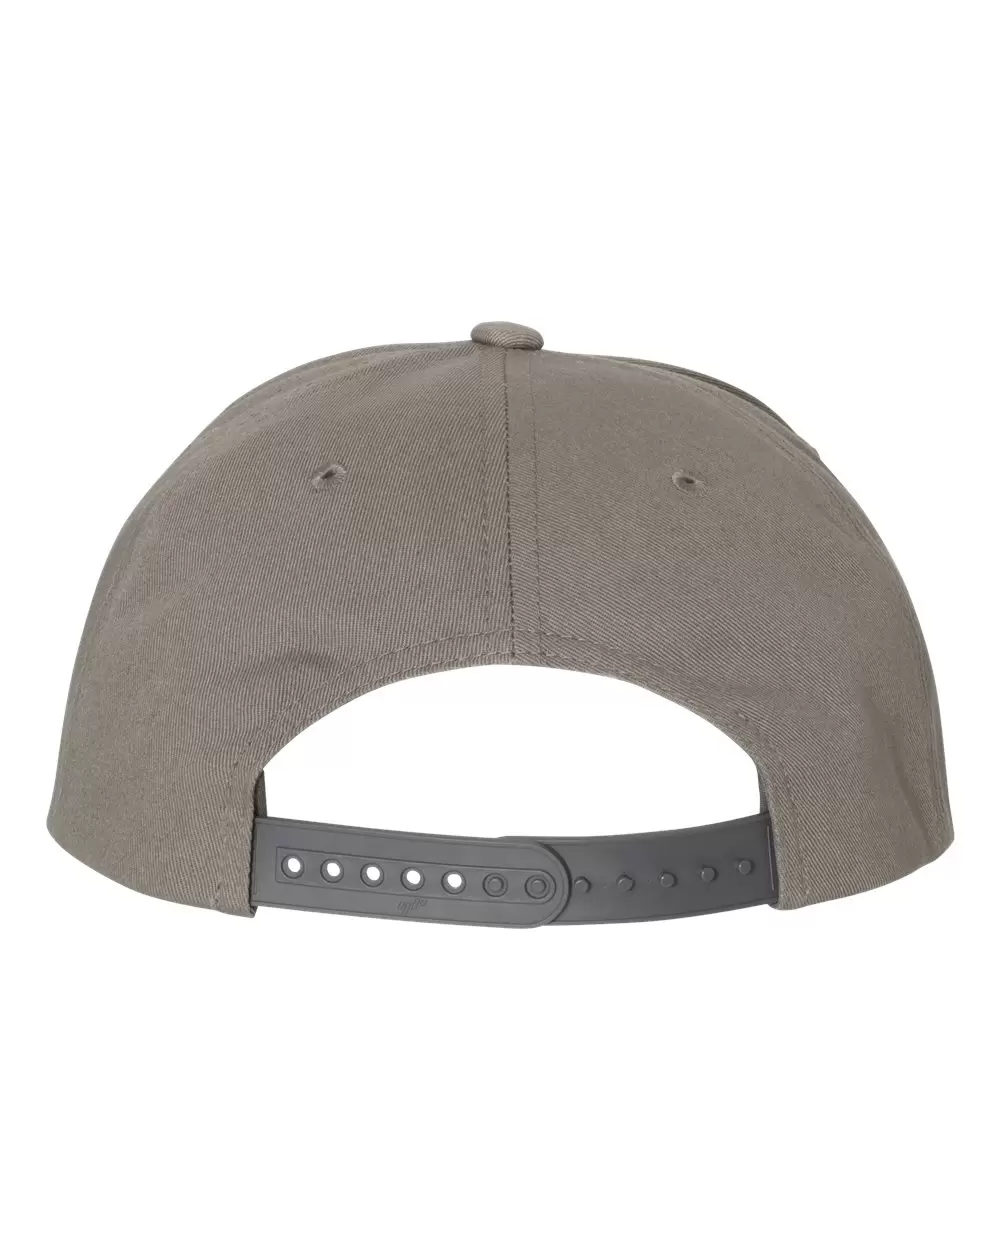 From Bill Flat - 6007 Five-Panel Cap Yupoong